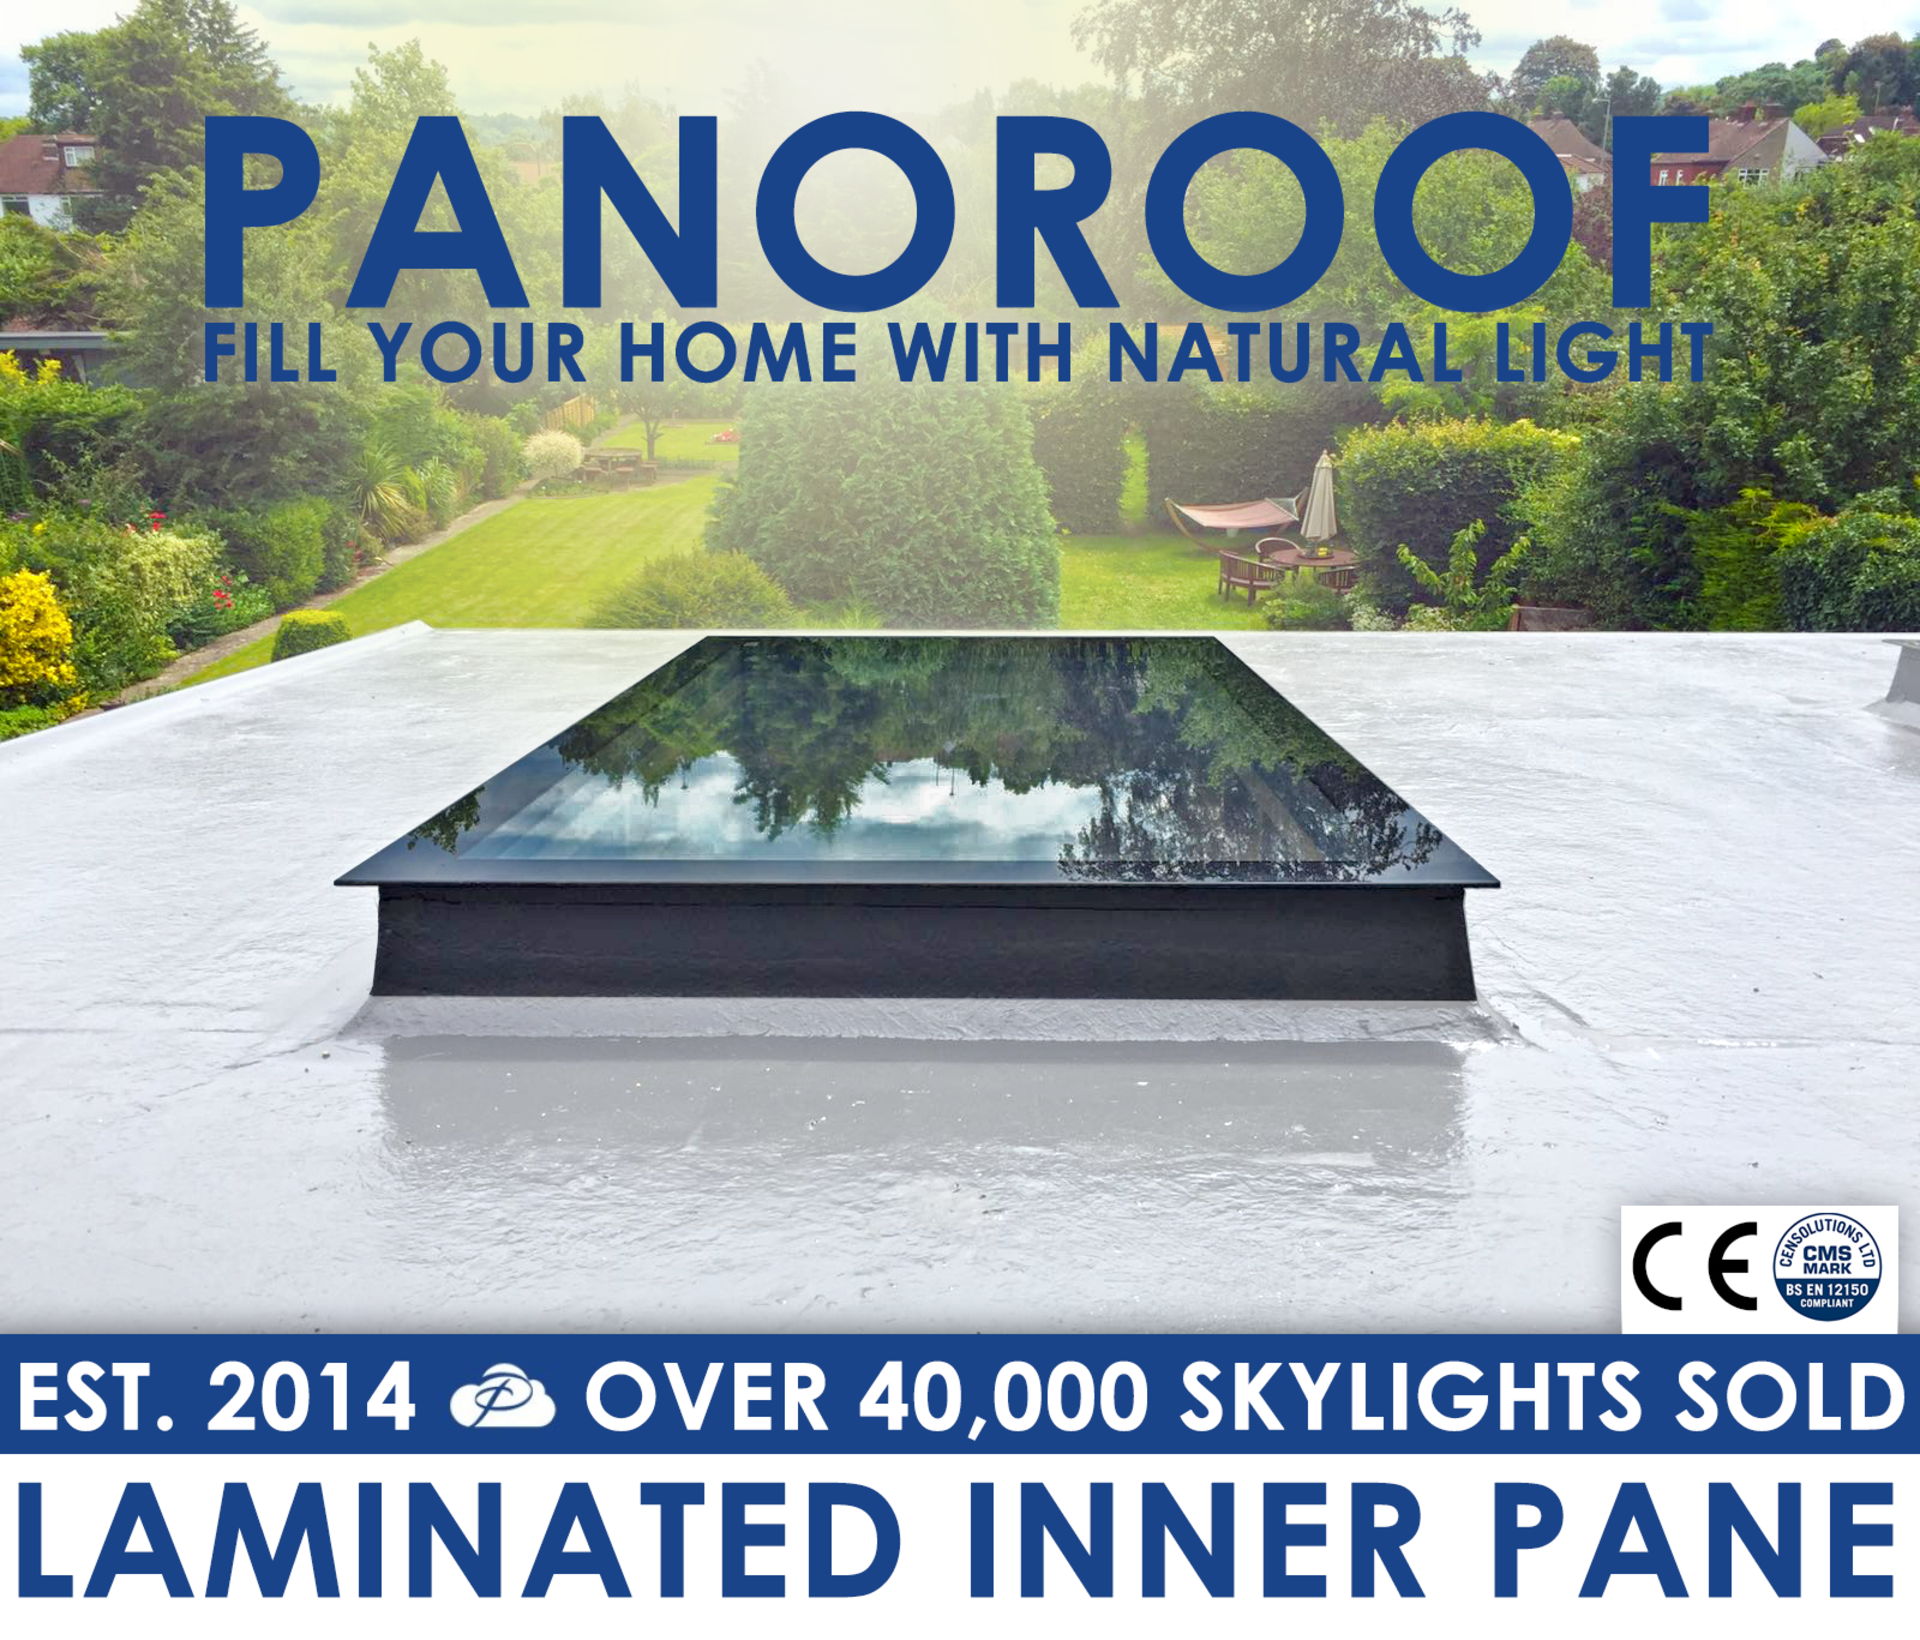 Panoroof 800x2500mm Triple Glazed Self Cleaning WITH 8.8mm LAMINATED INNER PANE (inside Size Visable